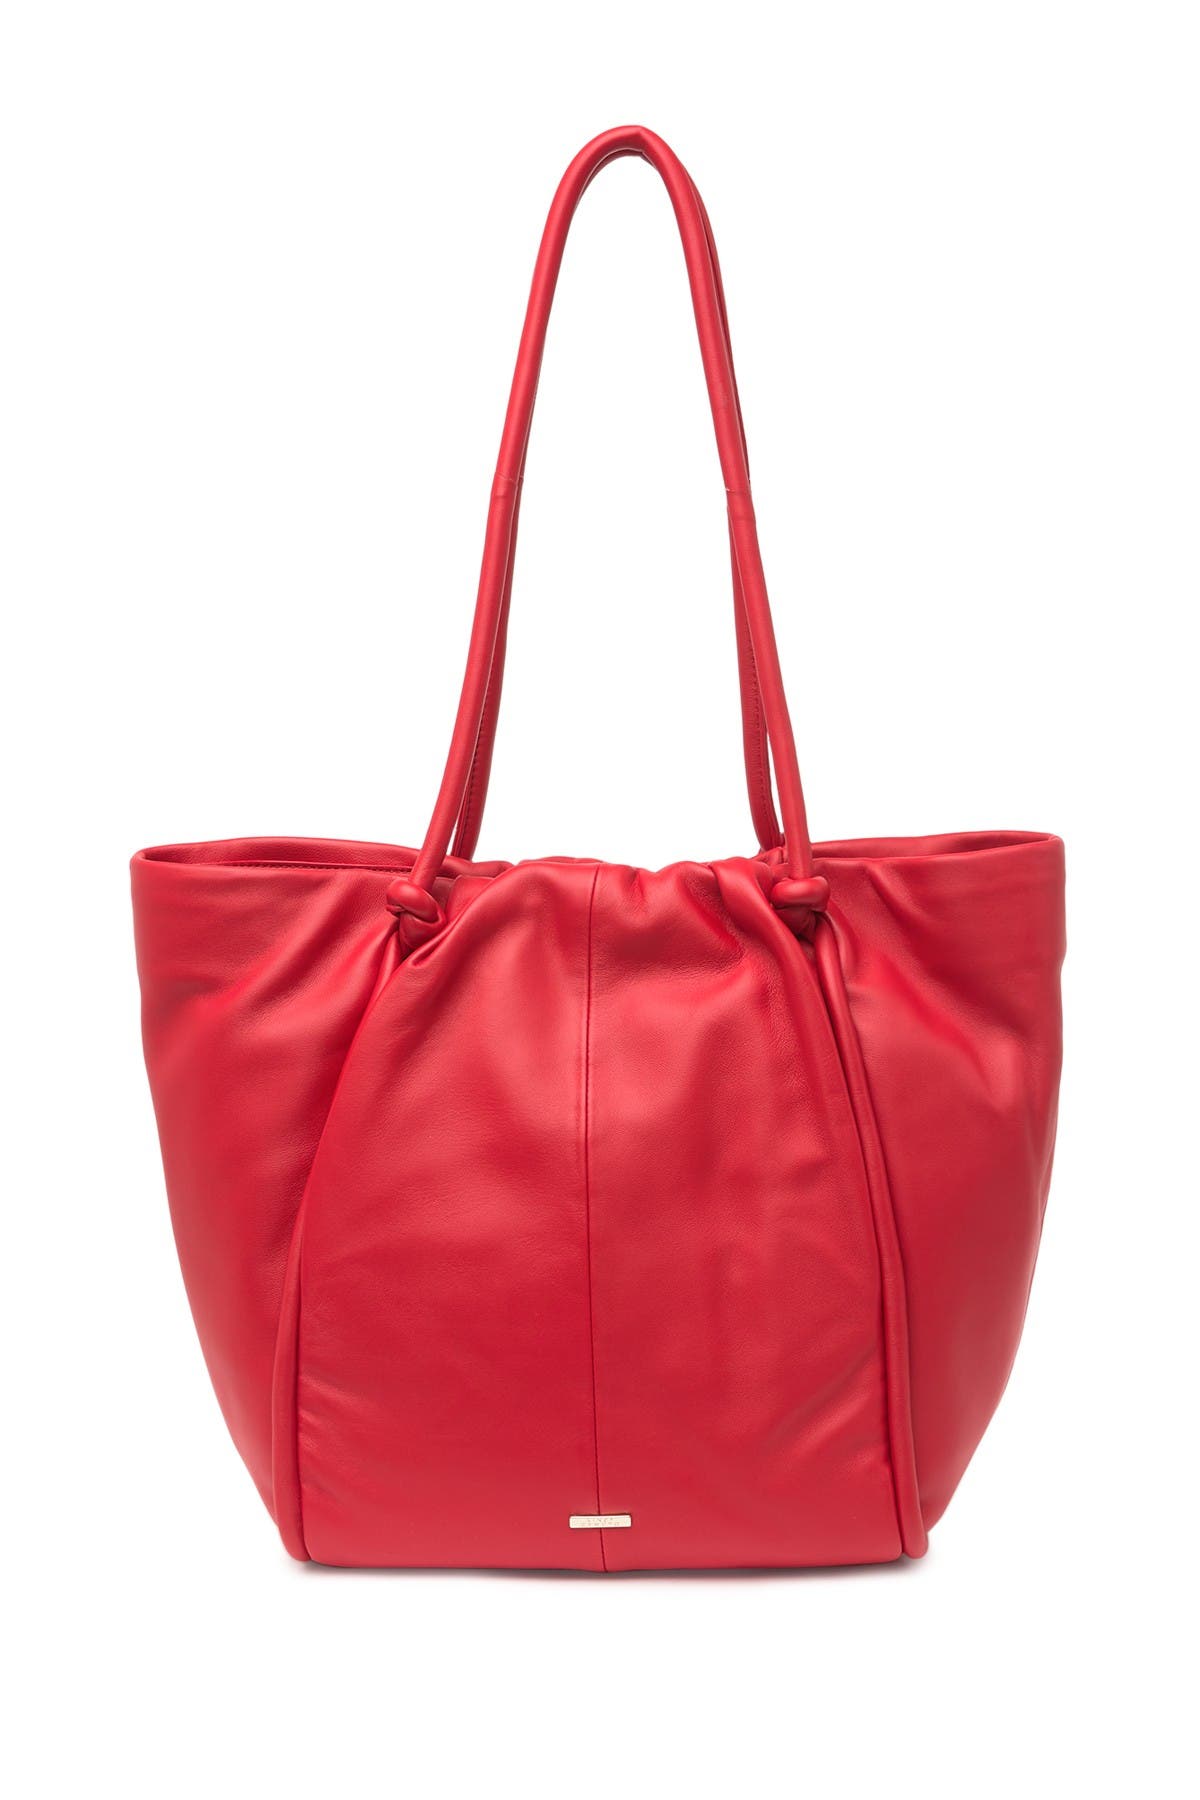 Vince Camuto Jude Leather Tote Bag In Red 01